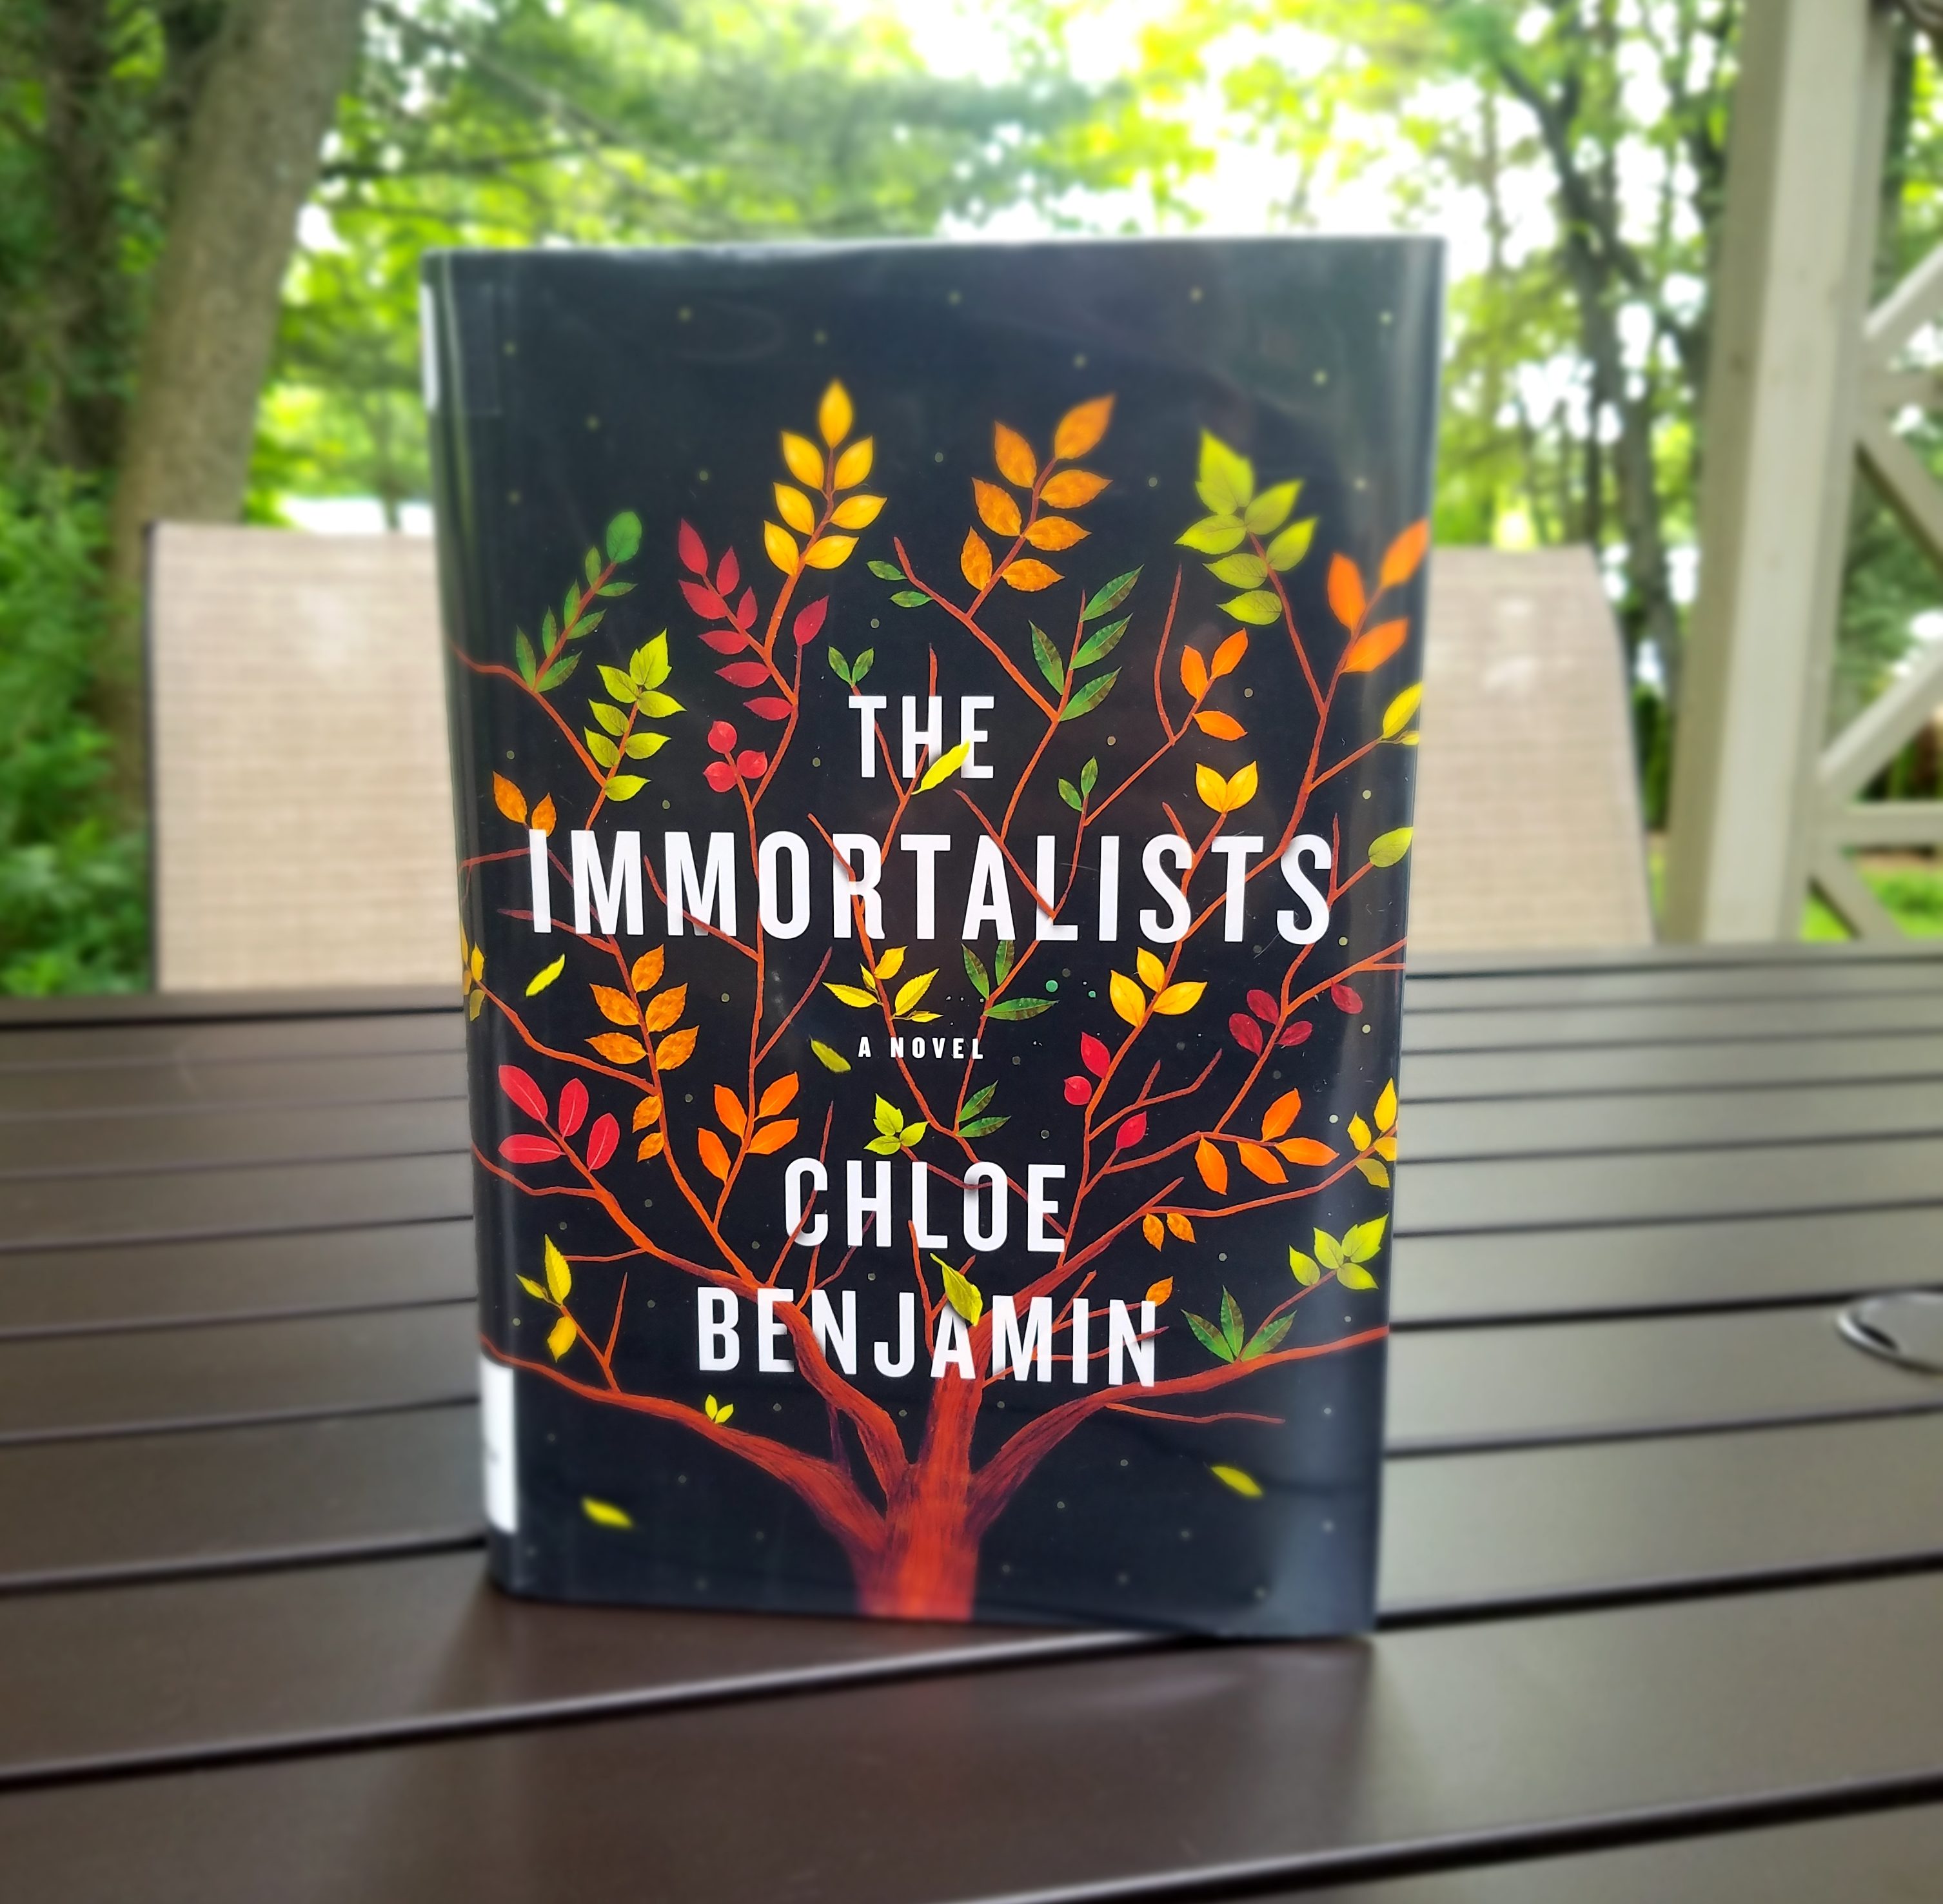 Book Cover of THE IMMORTALISTS by Chloe Benjamin